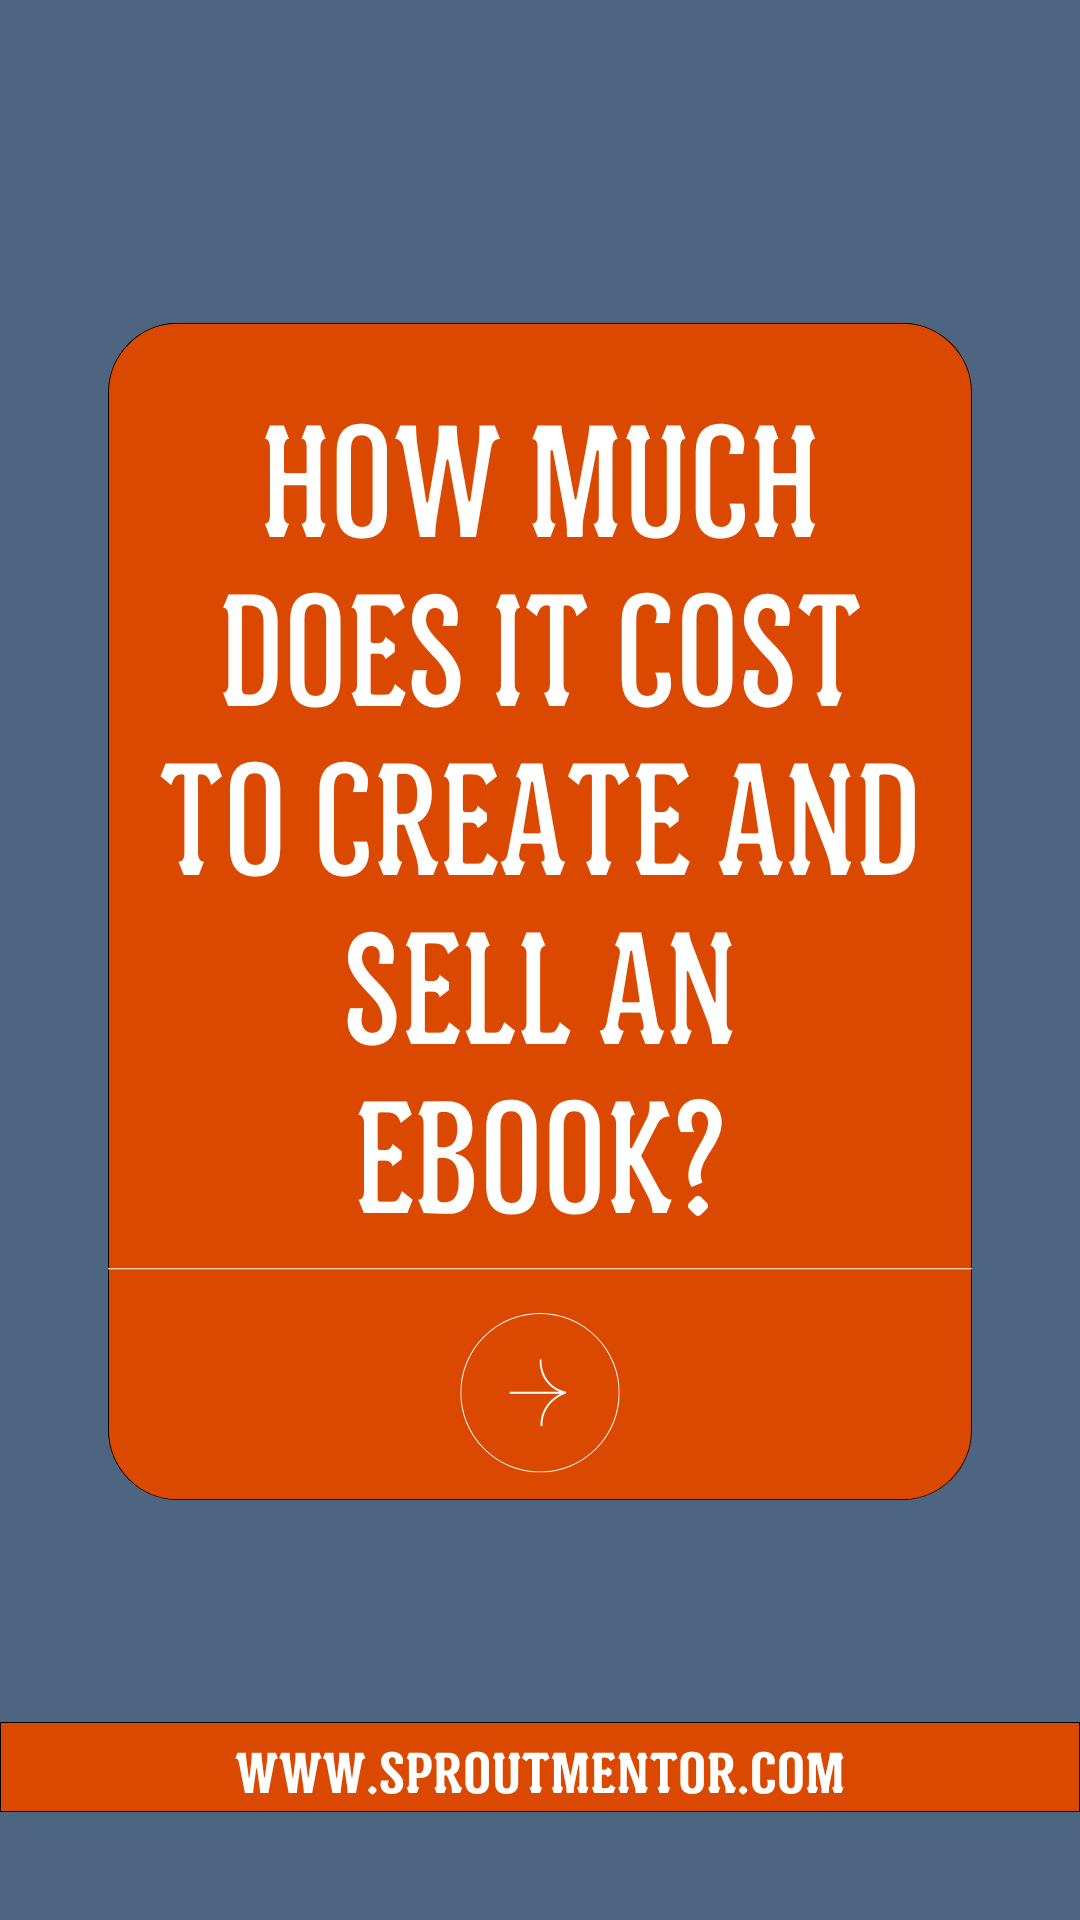 How-Much-Does-It-Cost-To-Create-And-Sell-An-Ebook